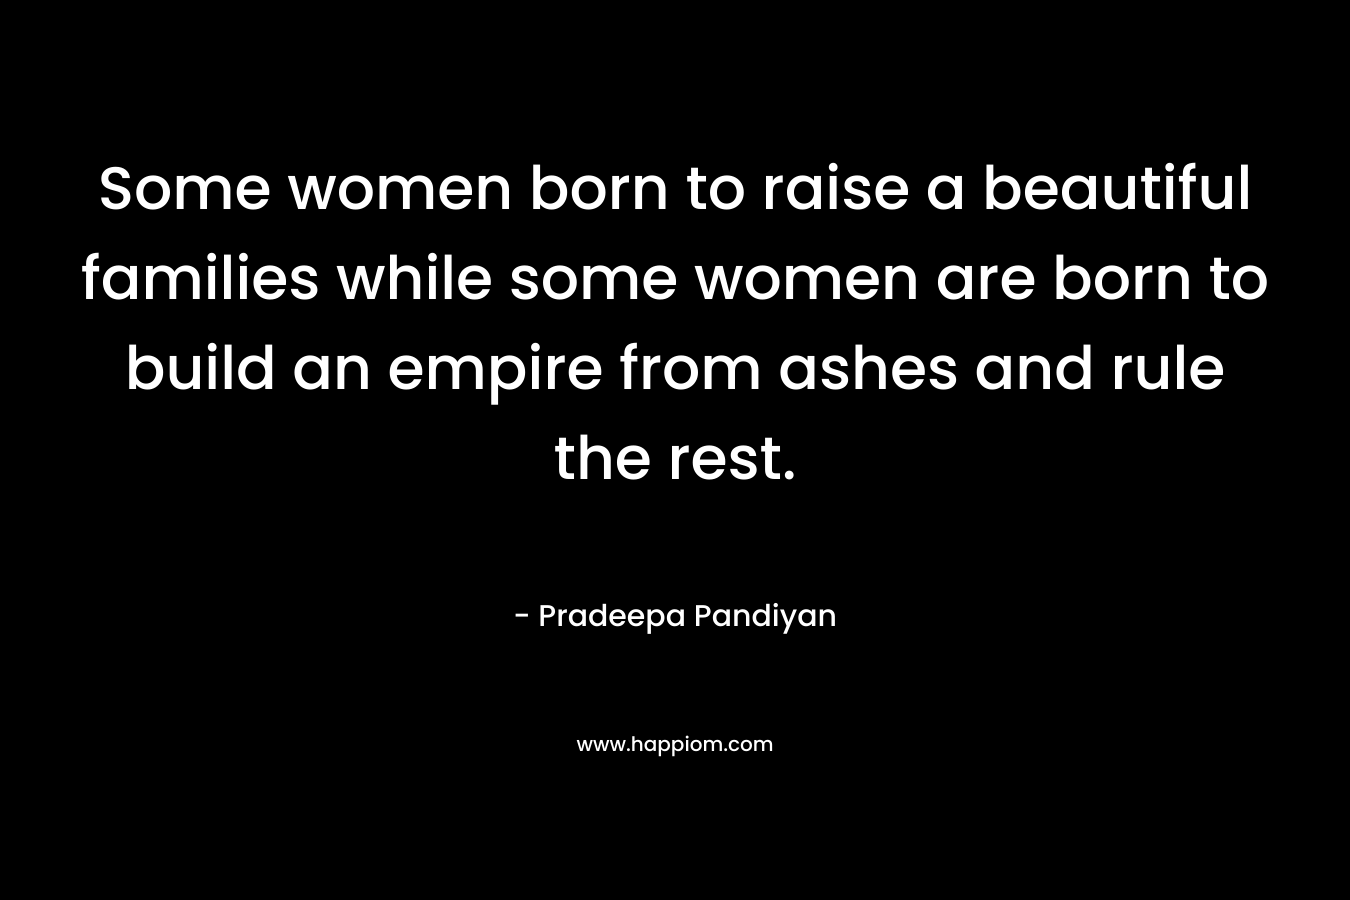 Some women born to raise a beautiful families while some women are born to build an empire from ashes and rule the rest.